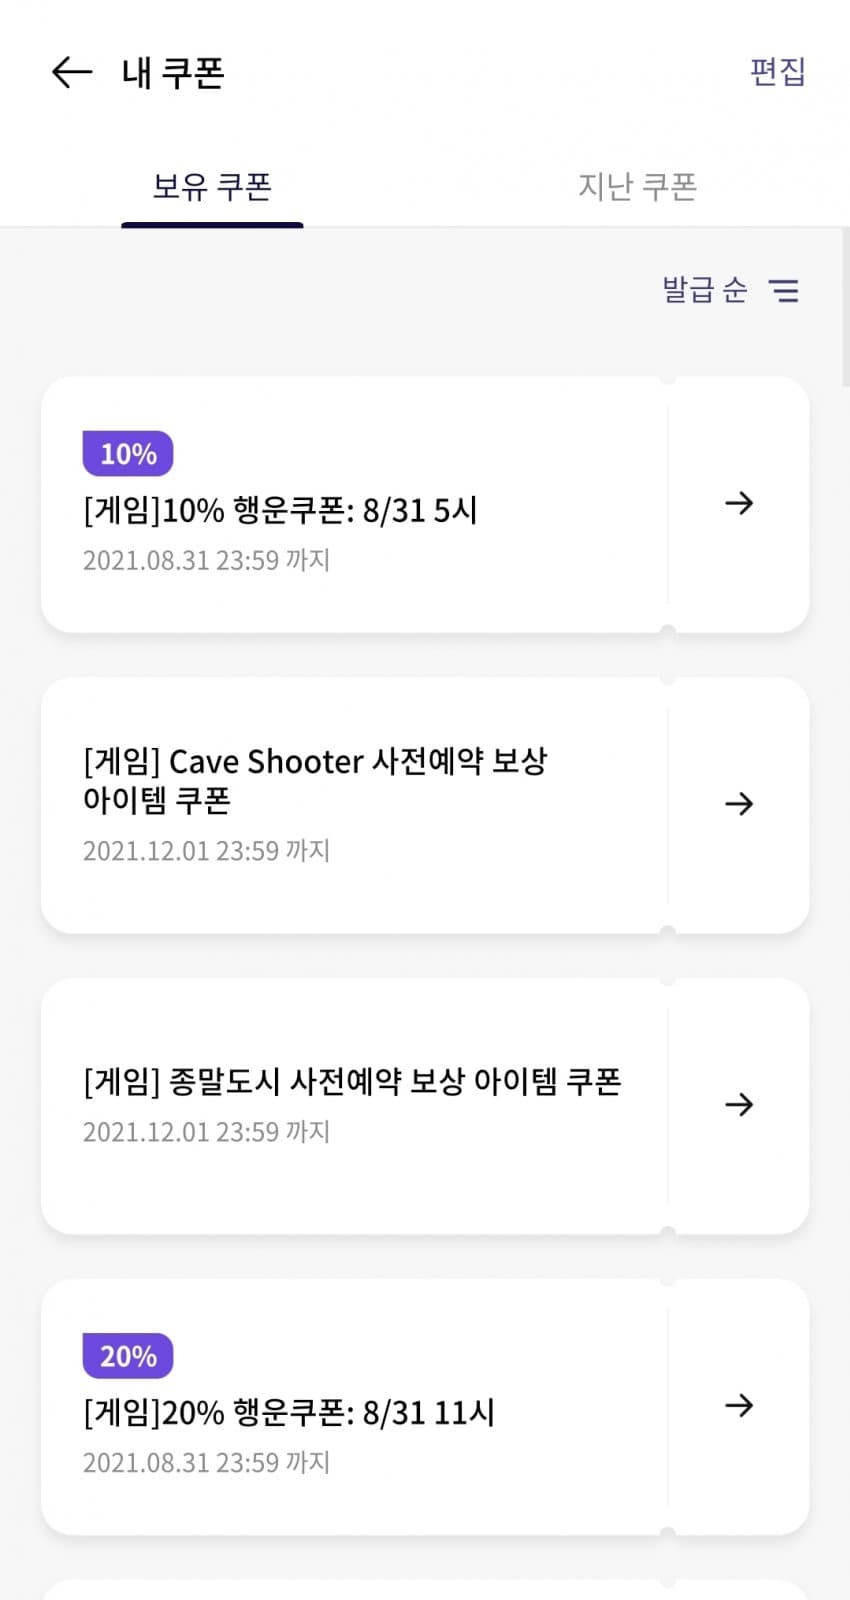 Cave shooter 쿠폰